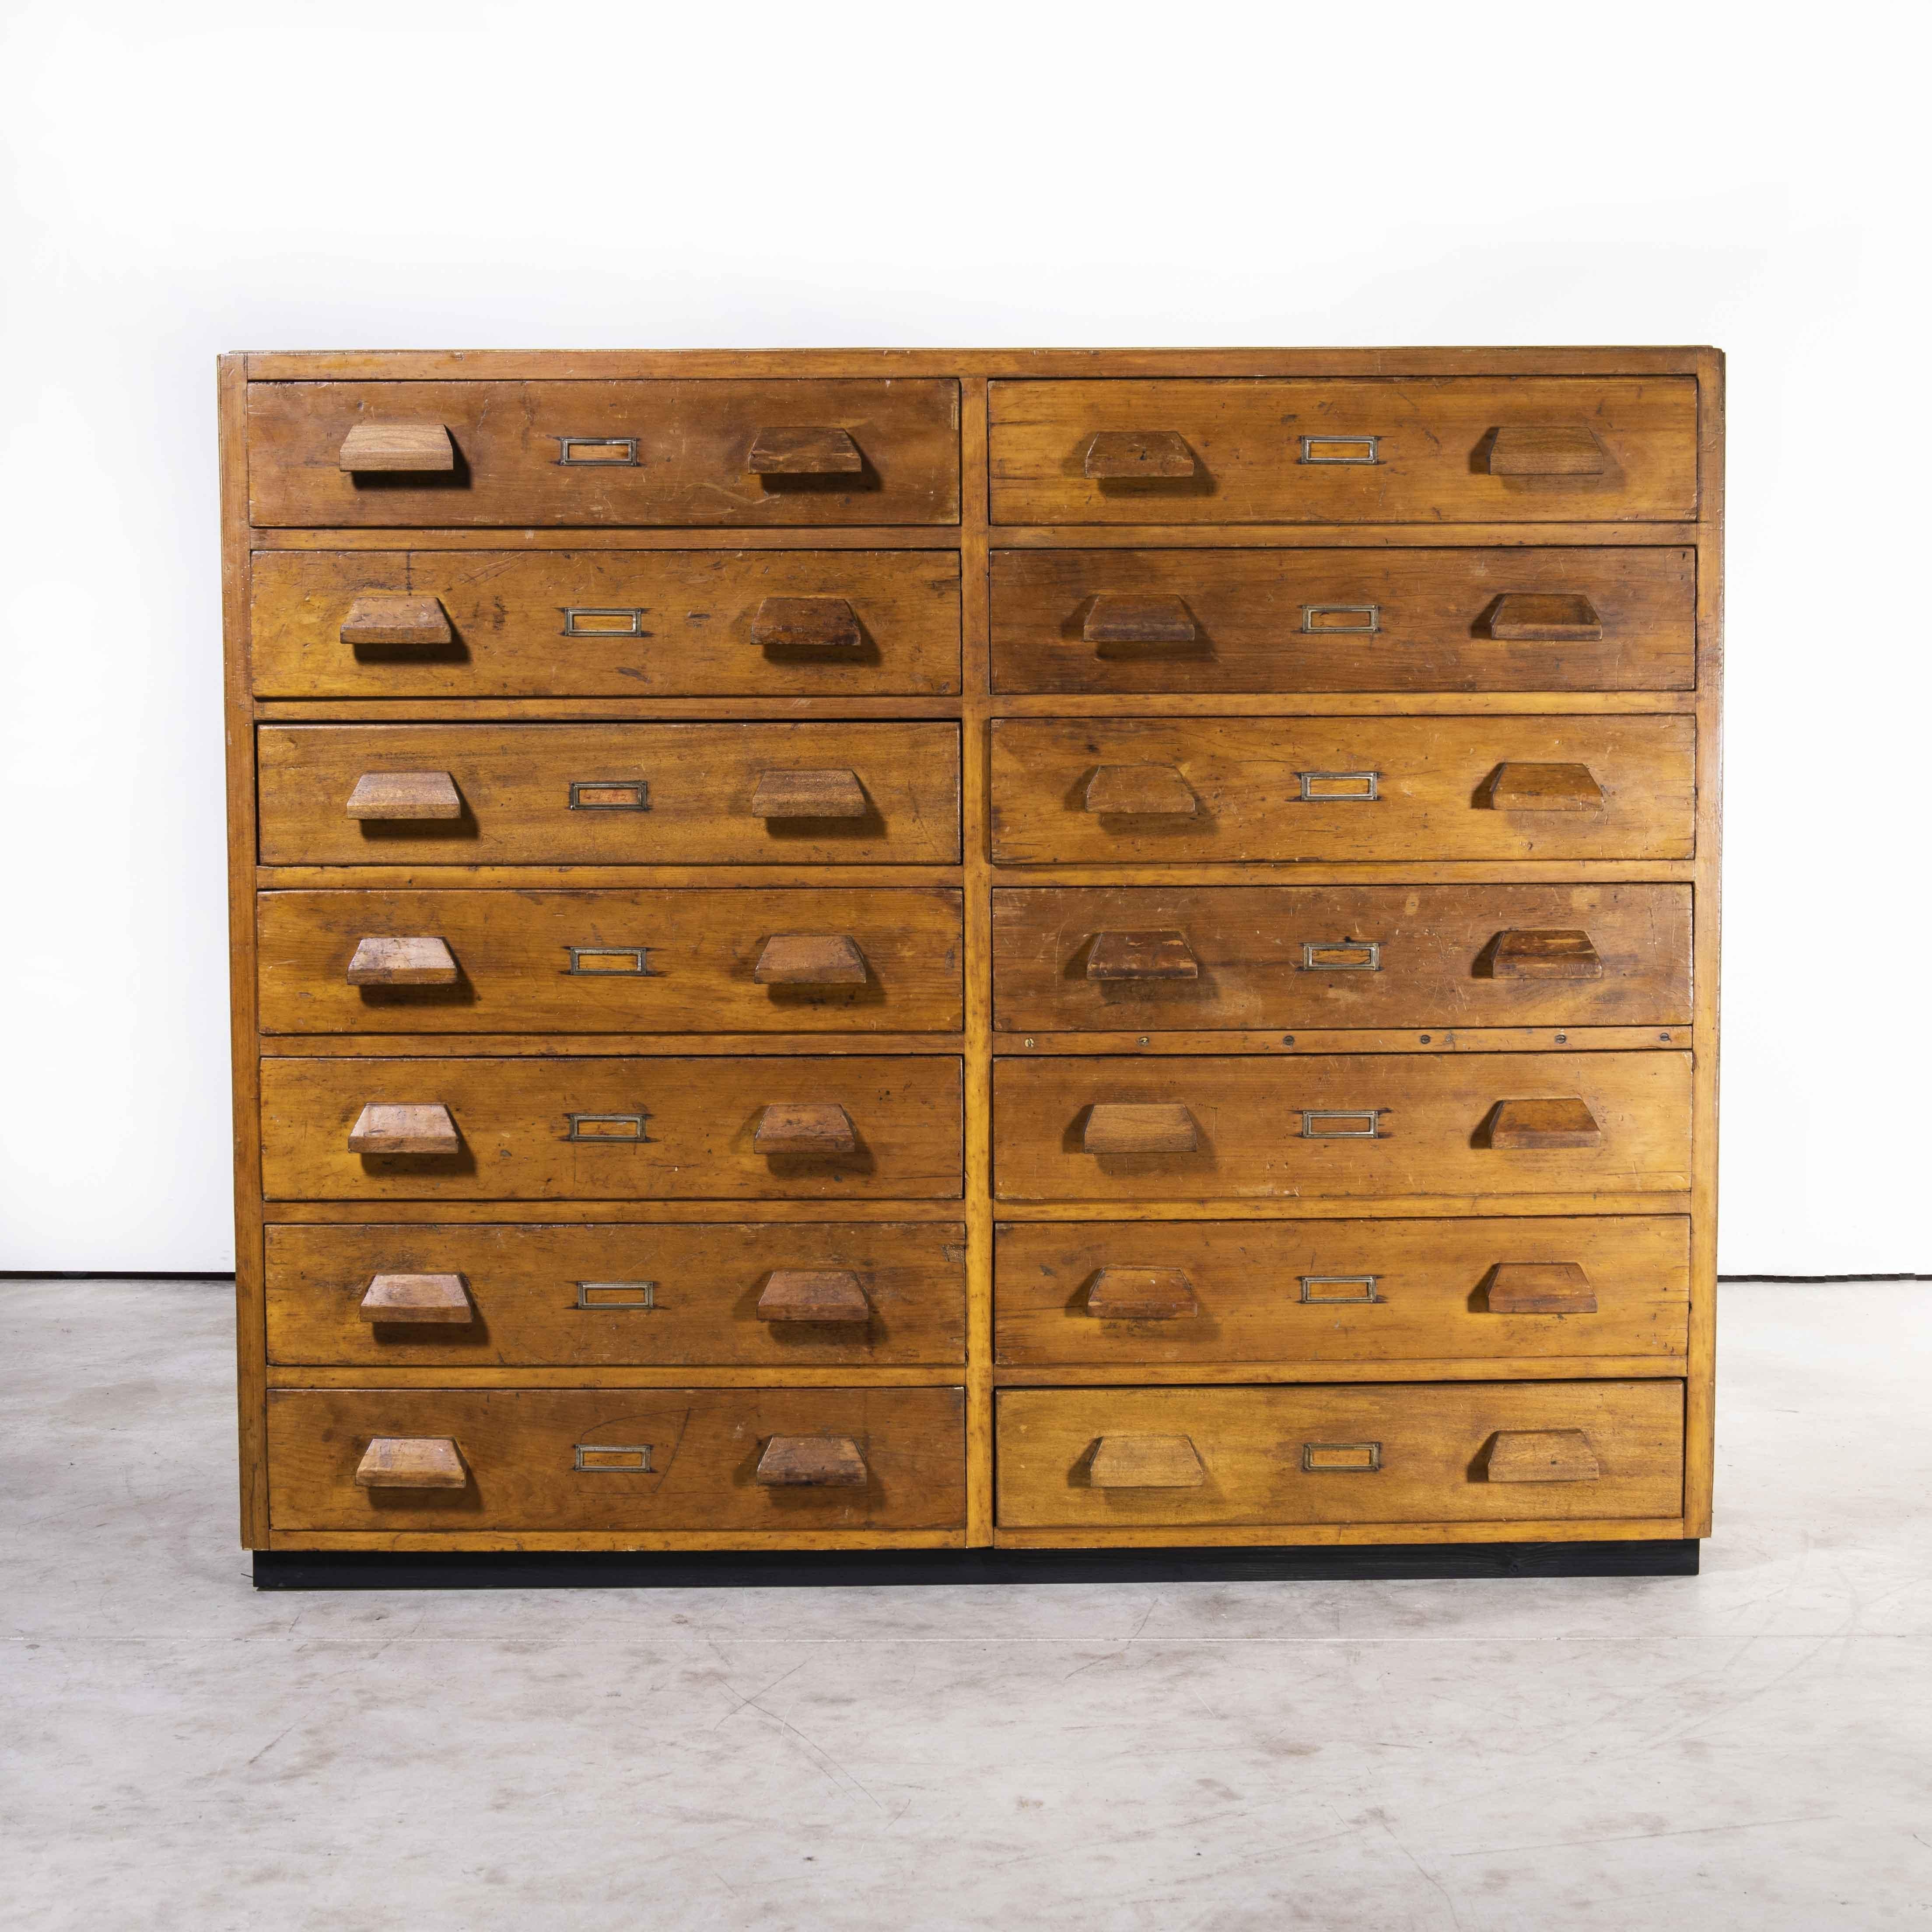 1950’s Very Large Collectors Chest Of Drawers – Fourteen Drawers

1950’s Very Large Collectors Chest Of Drawers – Fourteen Drawers. Sourced in Belgium this is a very large bank of drawers, original throughout with original handles and name card